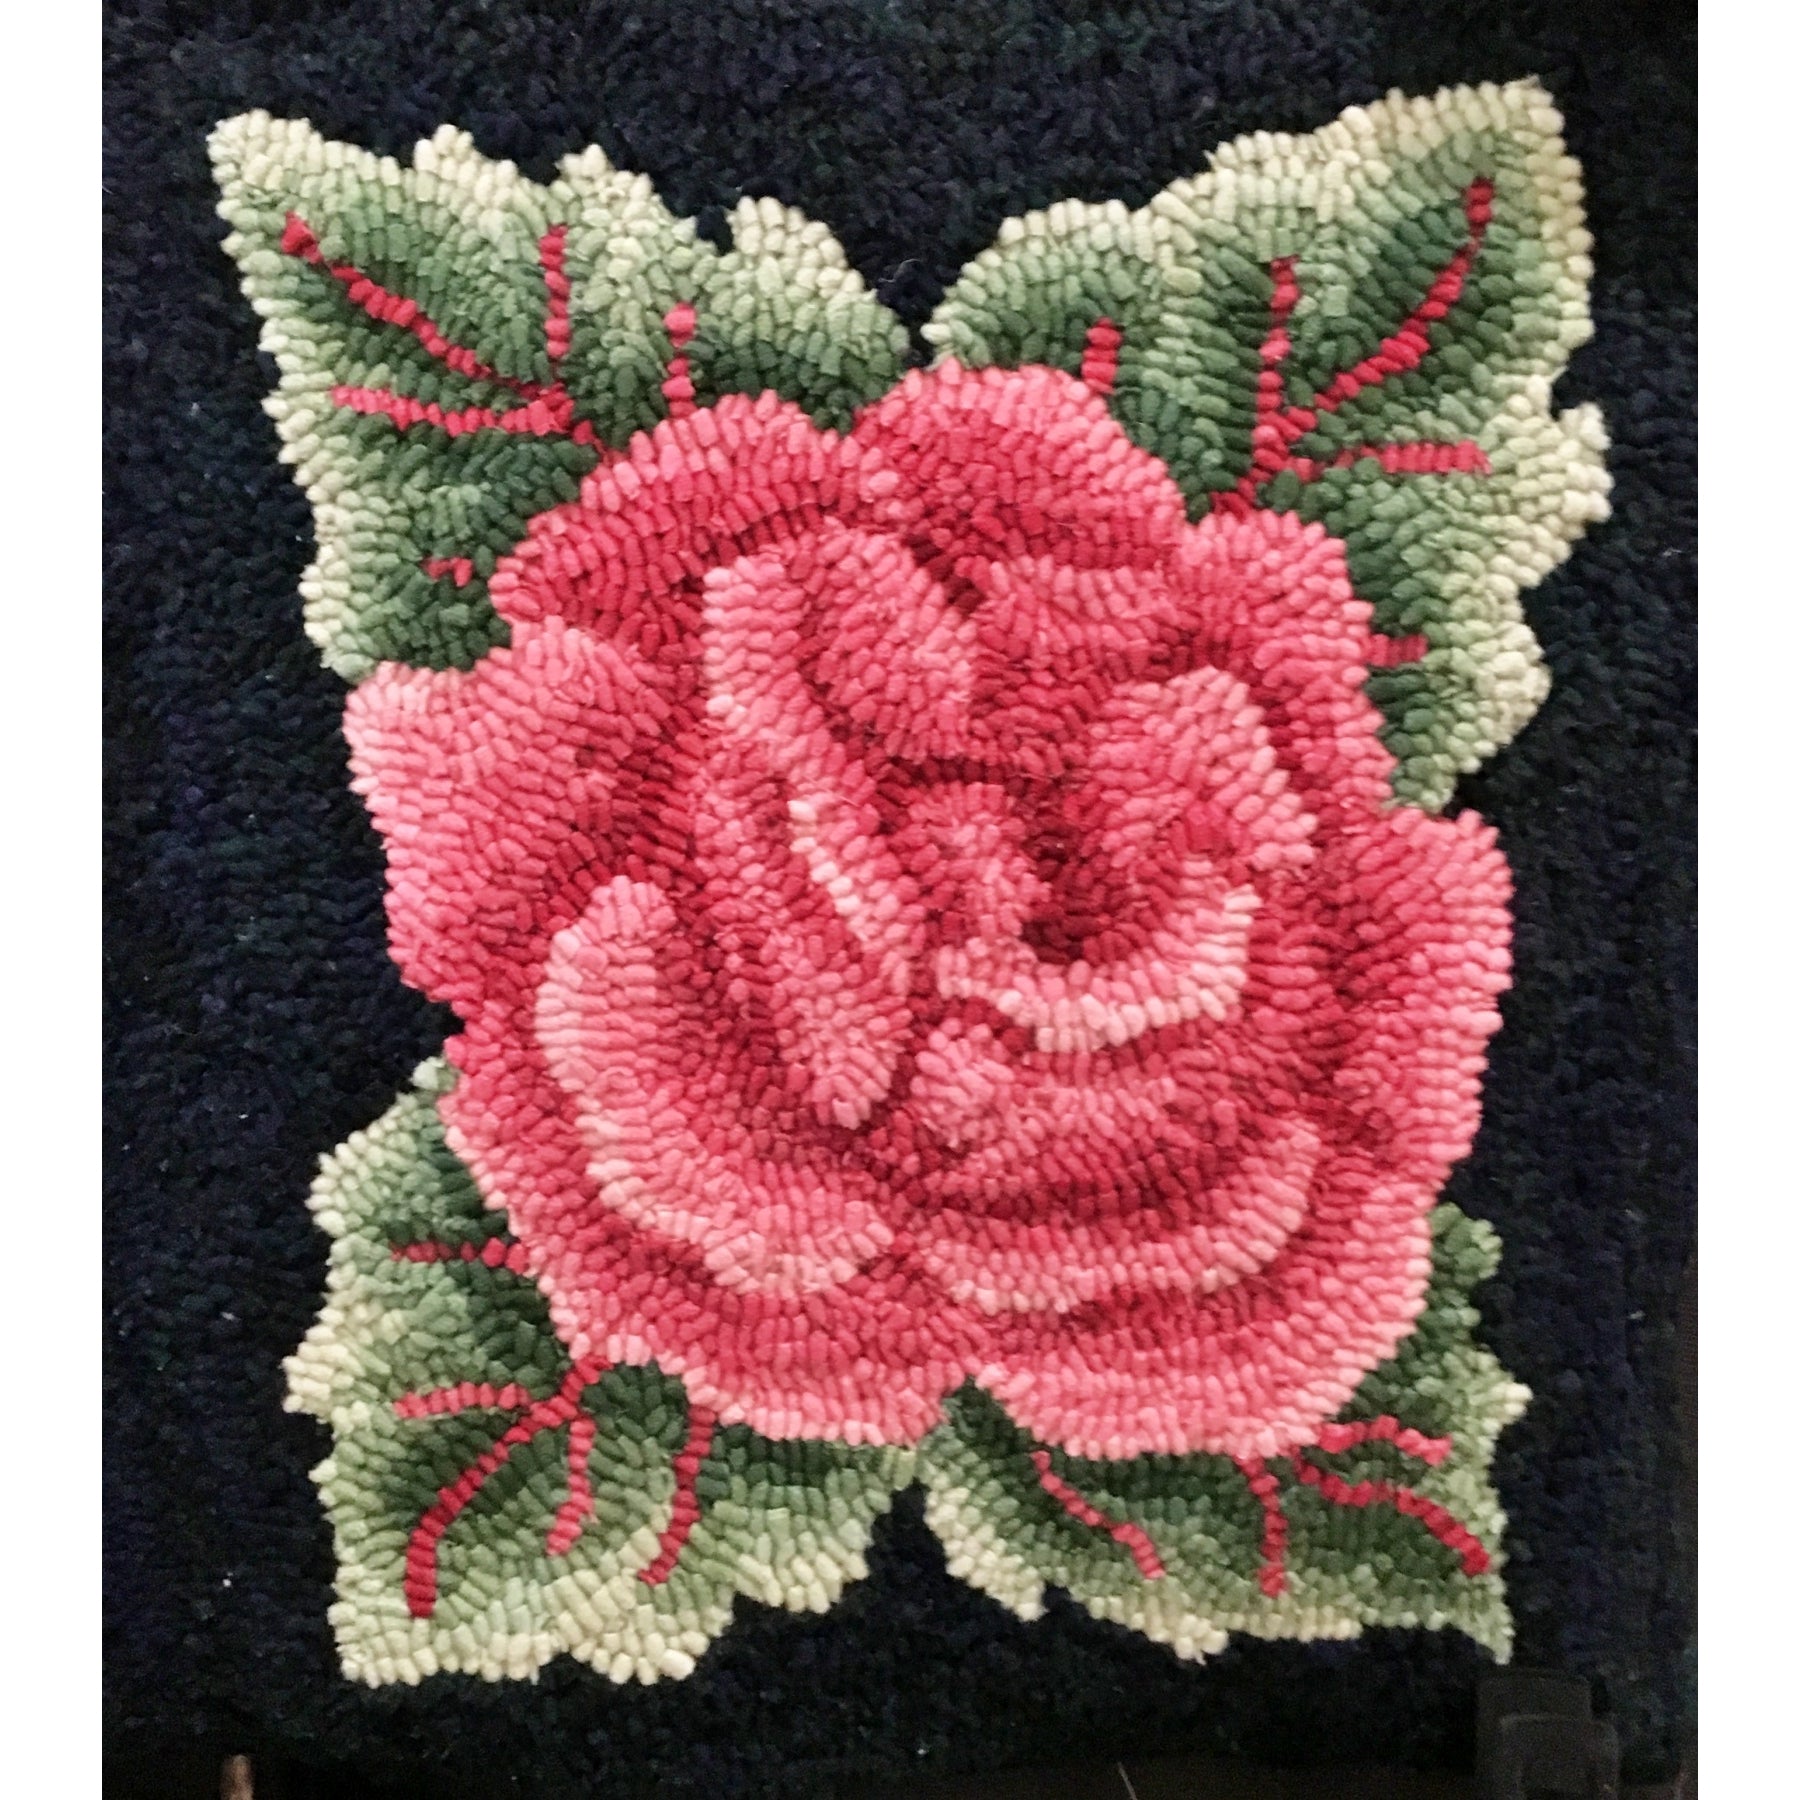 Alma's Reunion Rose, rug hooked by Alma Coia